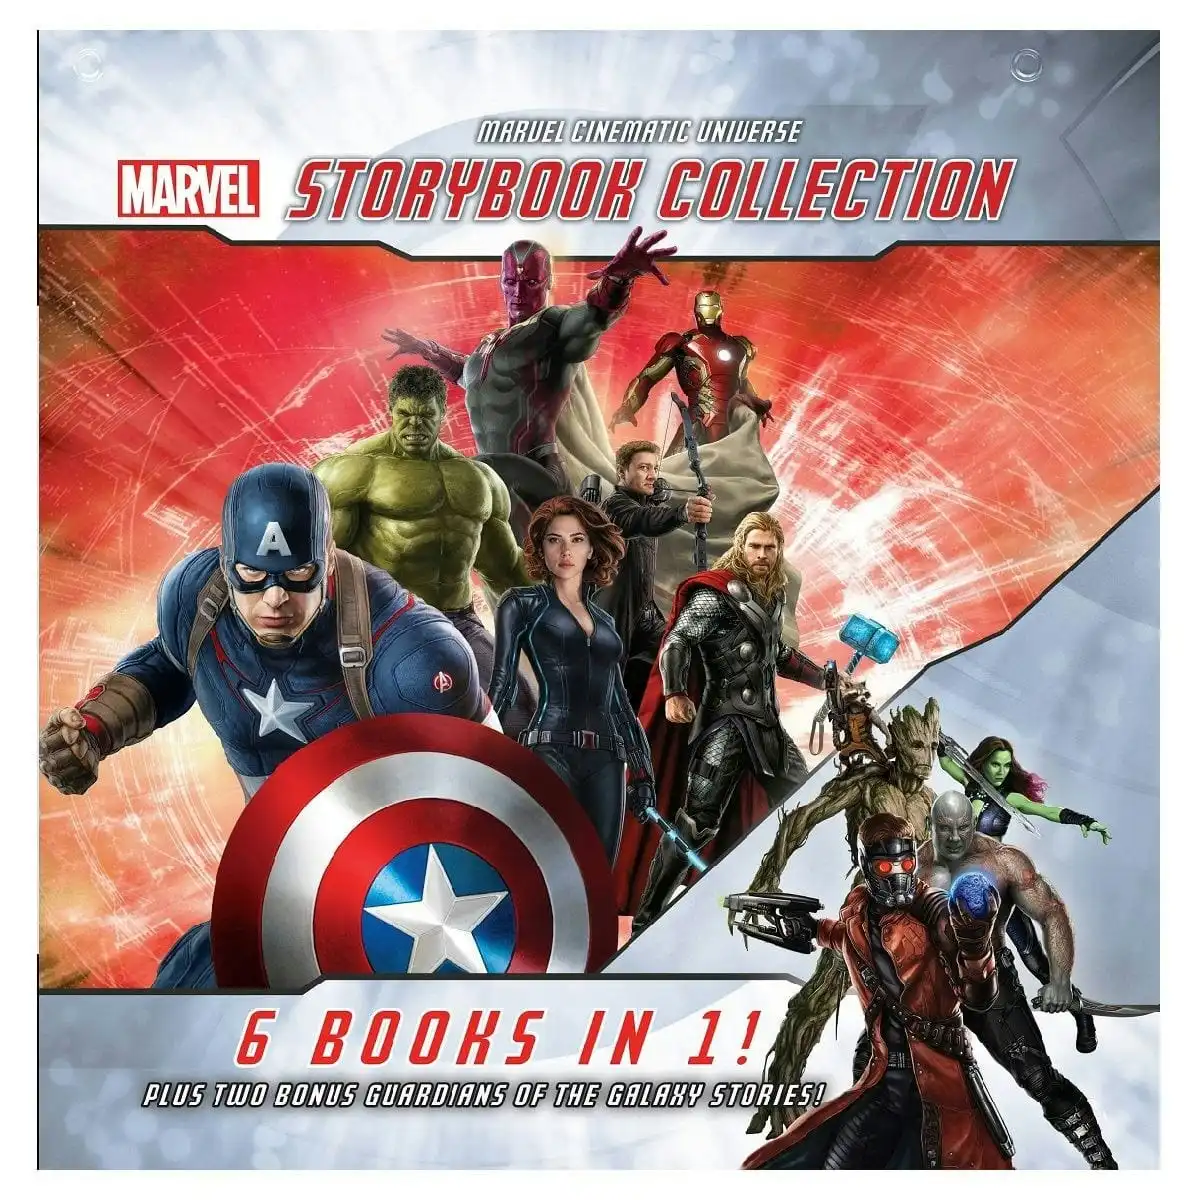 Promotional Marvel Cinematic Universe Storybook Collection